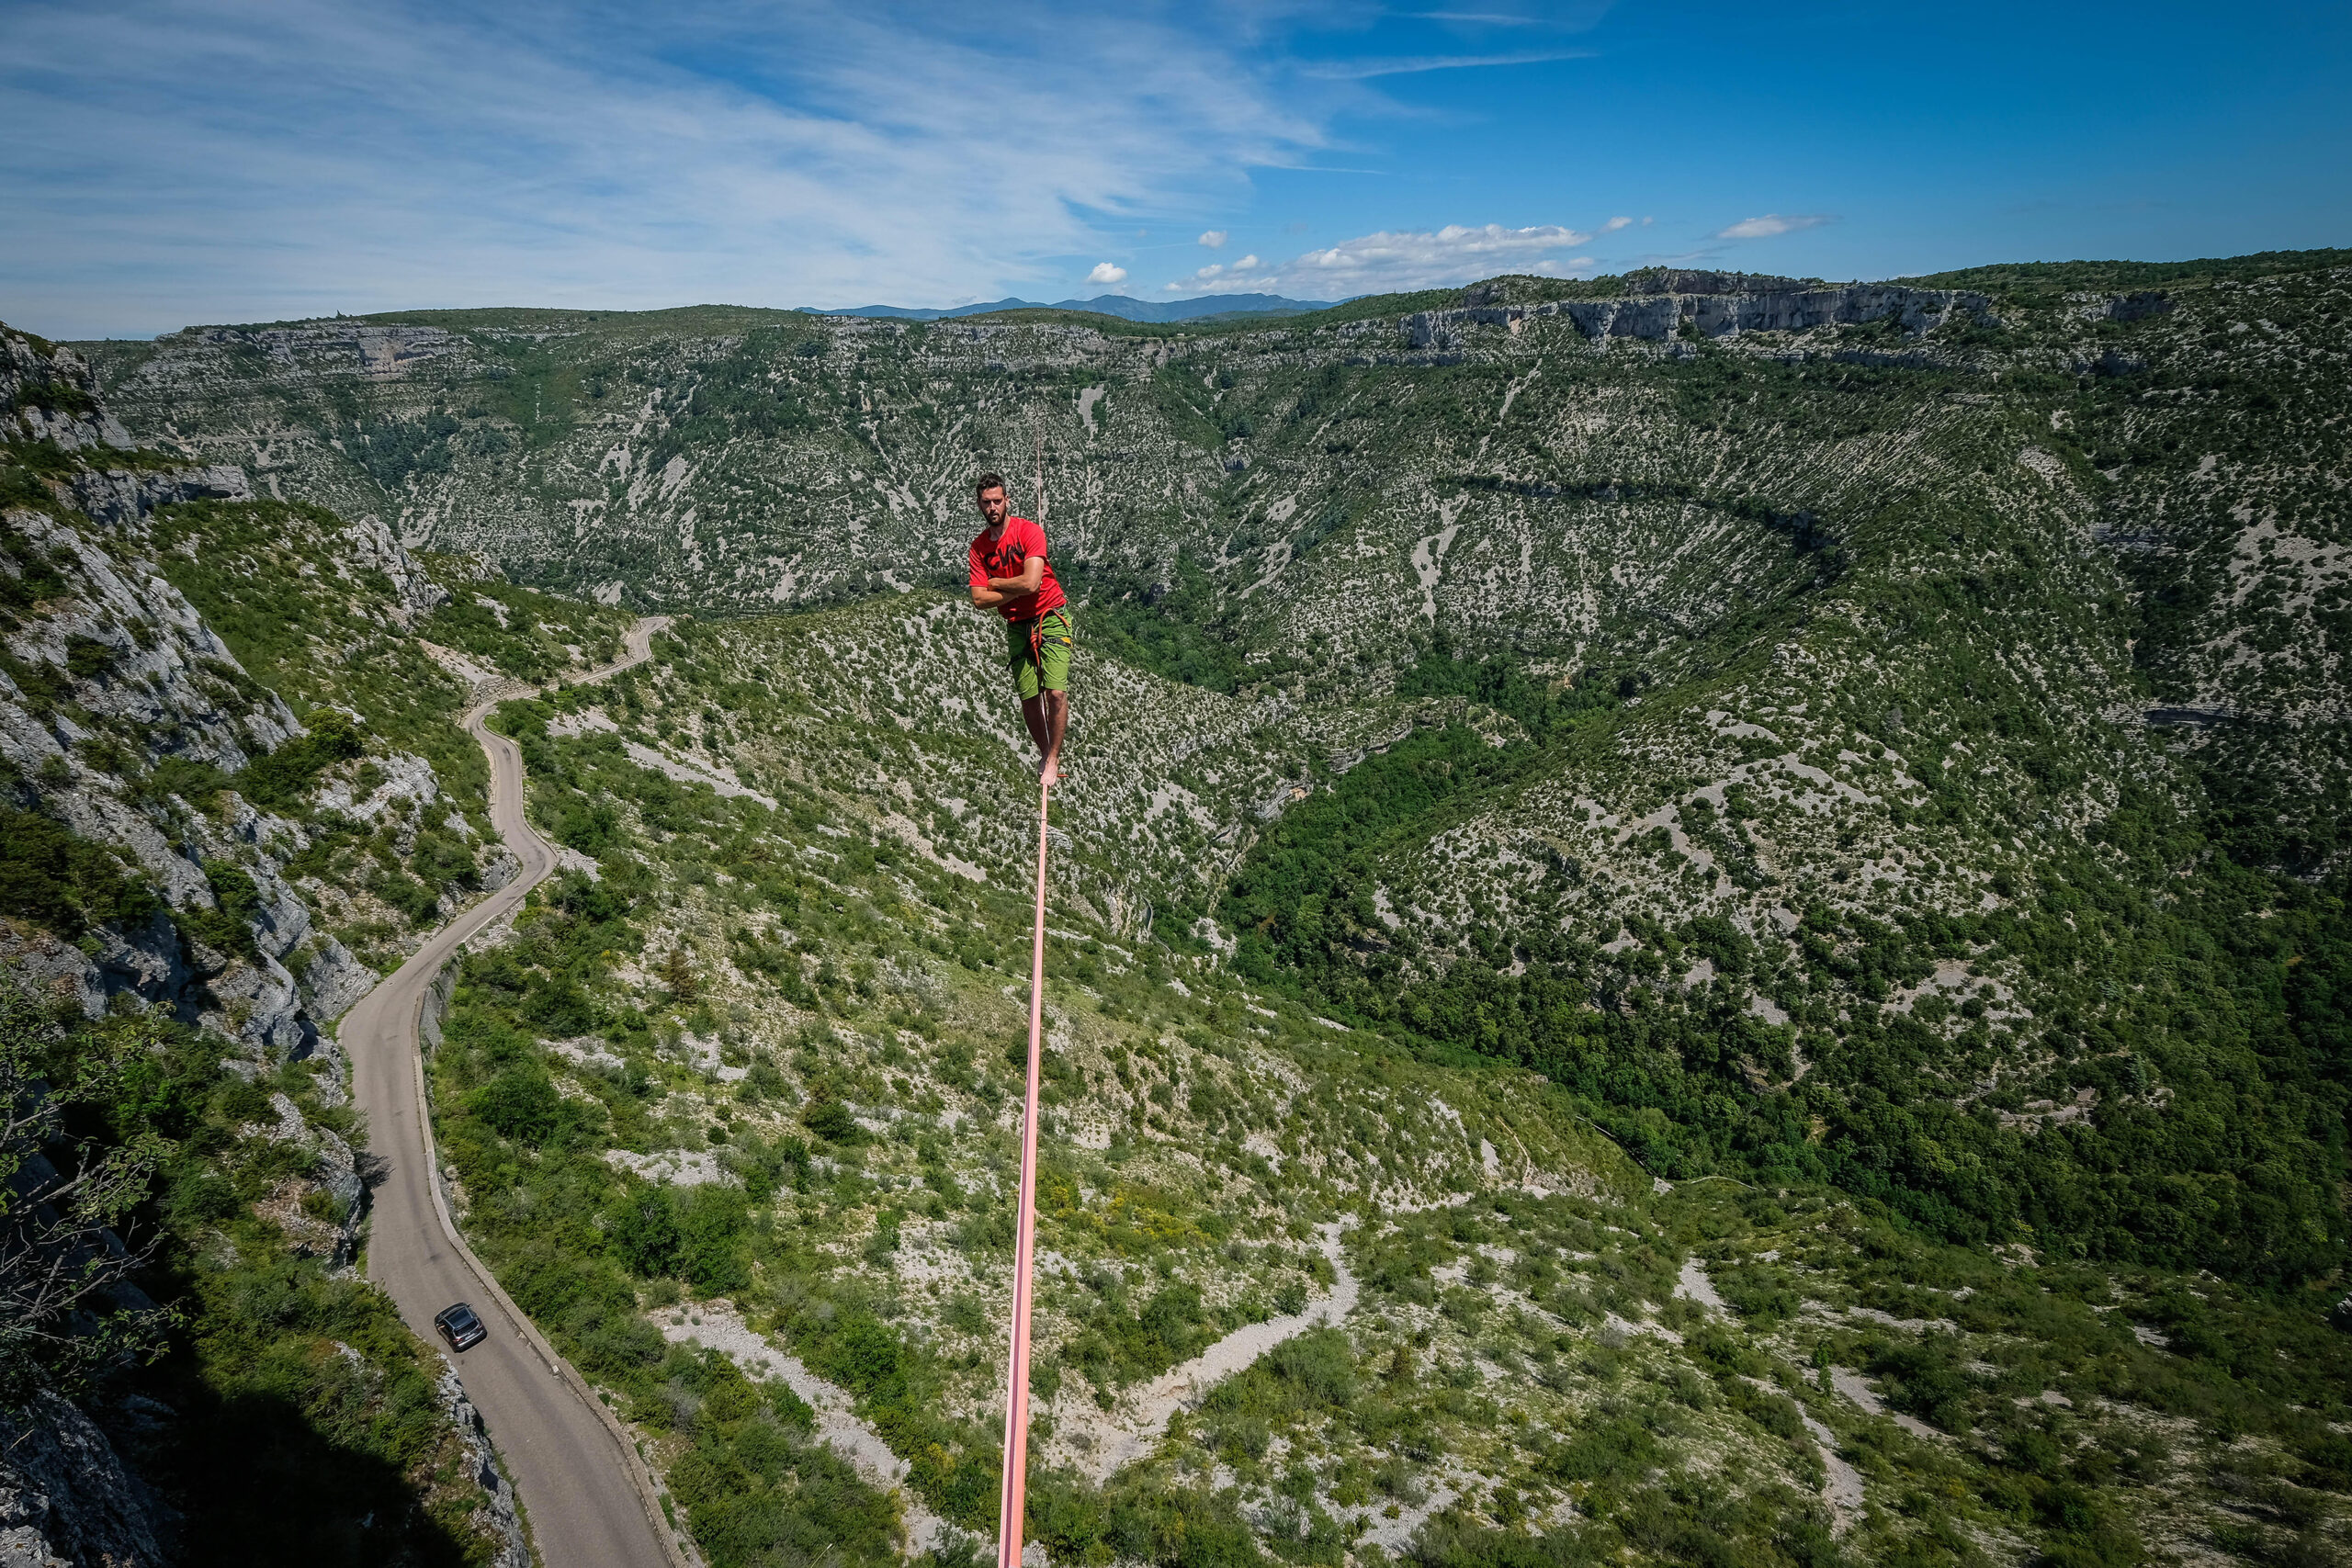 A barefoot man crosses his arms as he walks across a tightrope over road and a green valley.